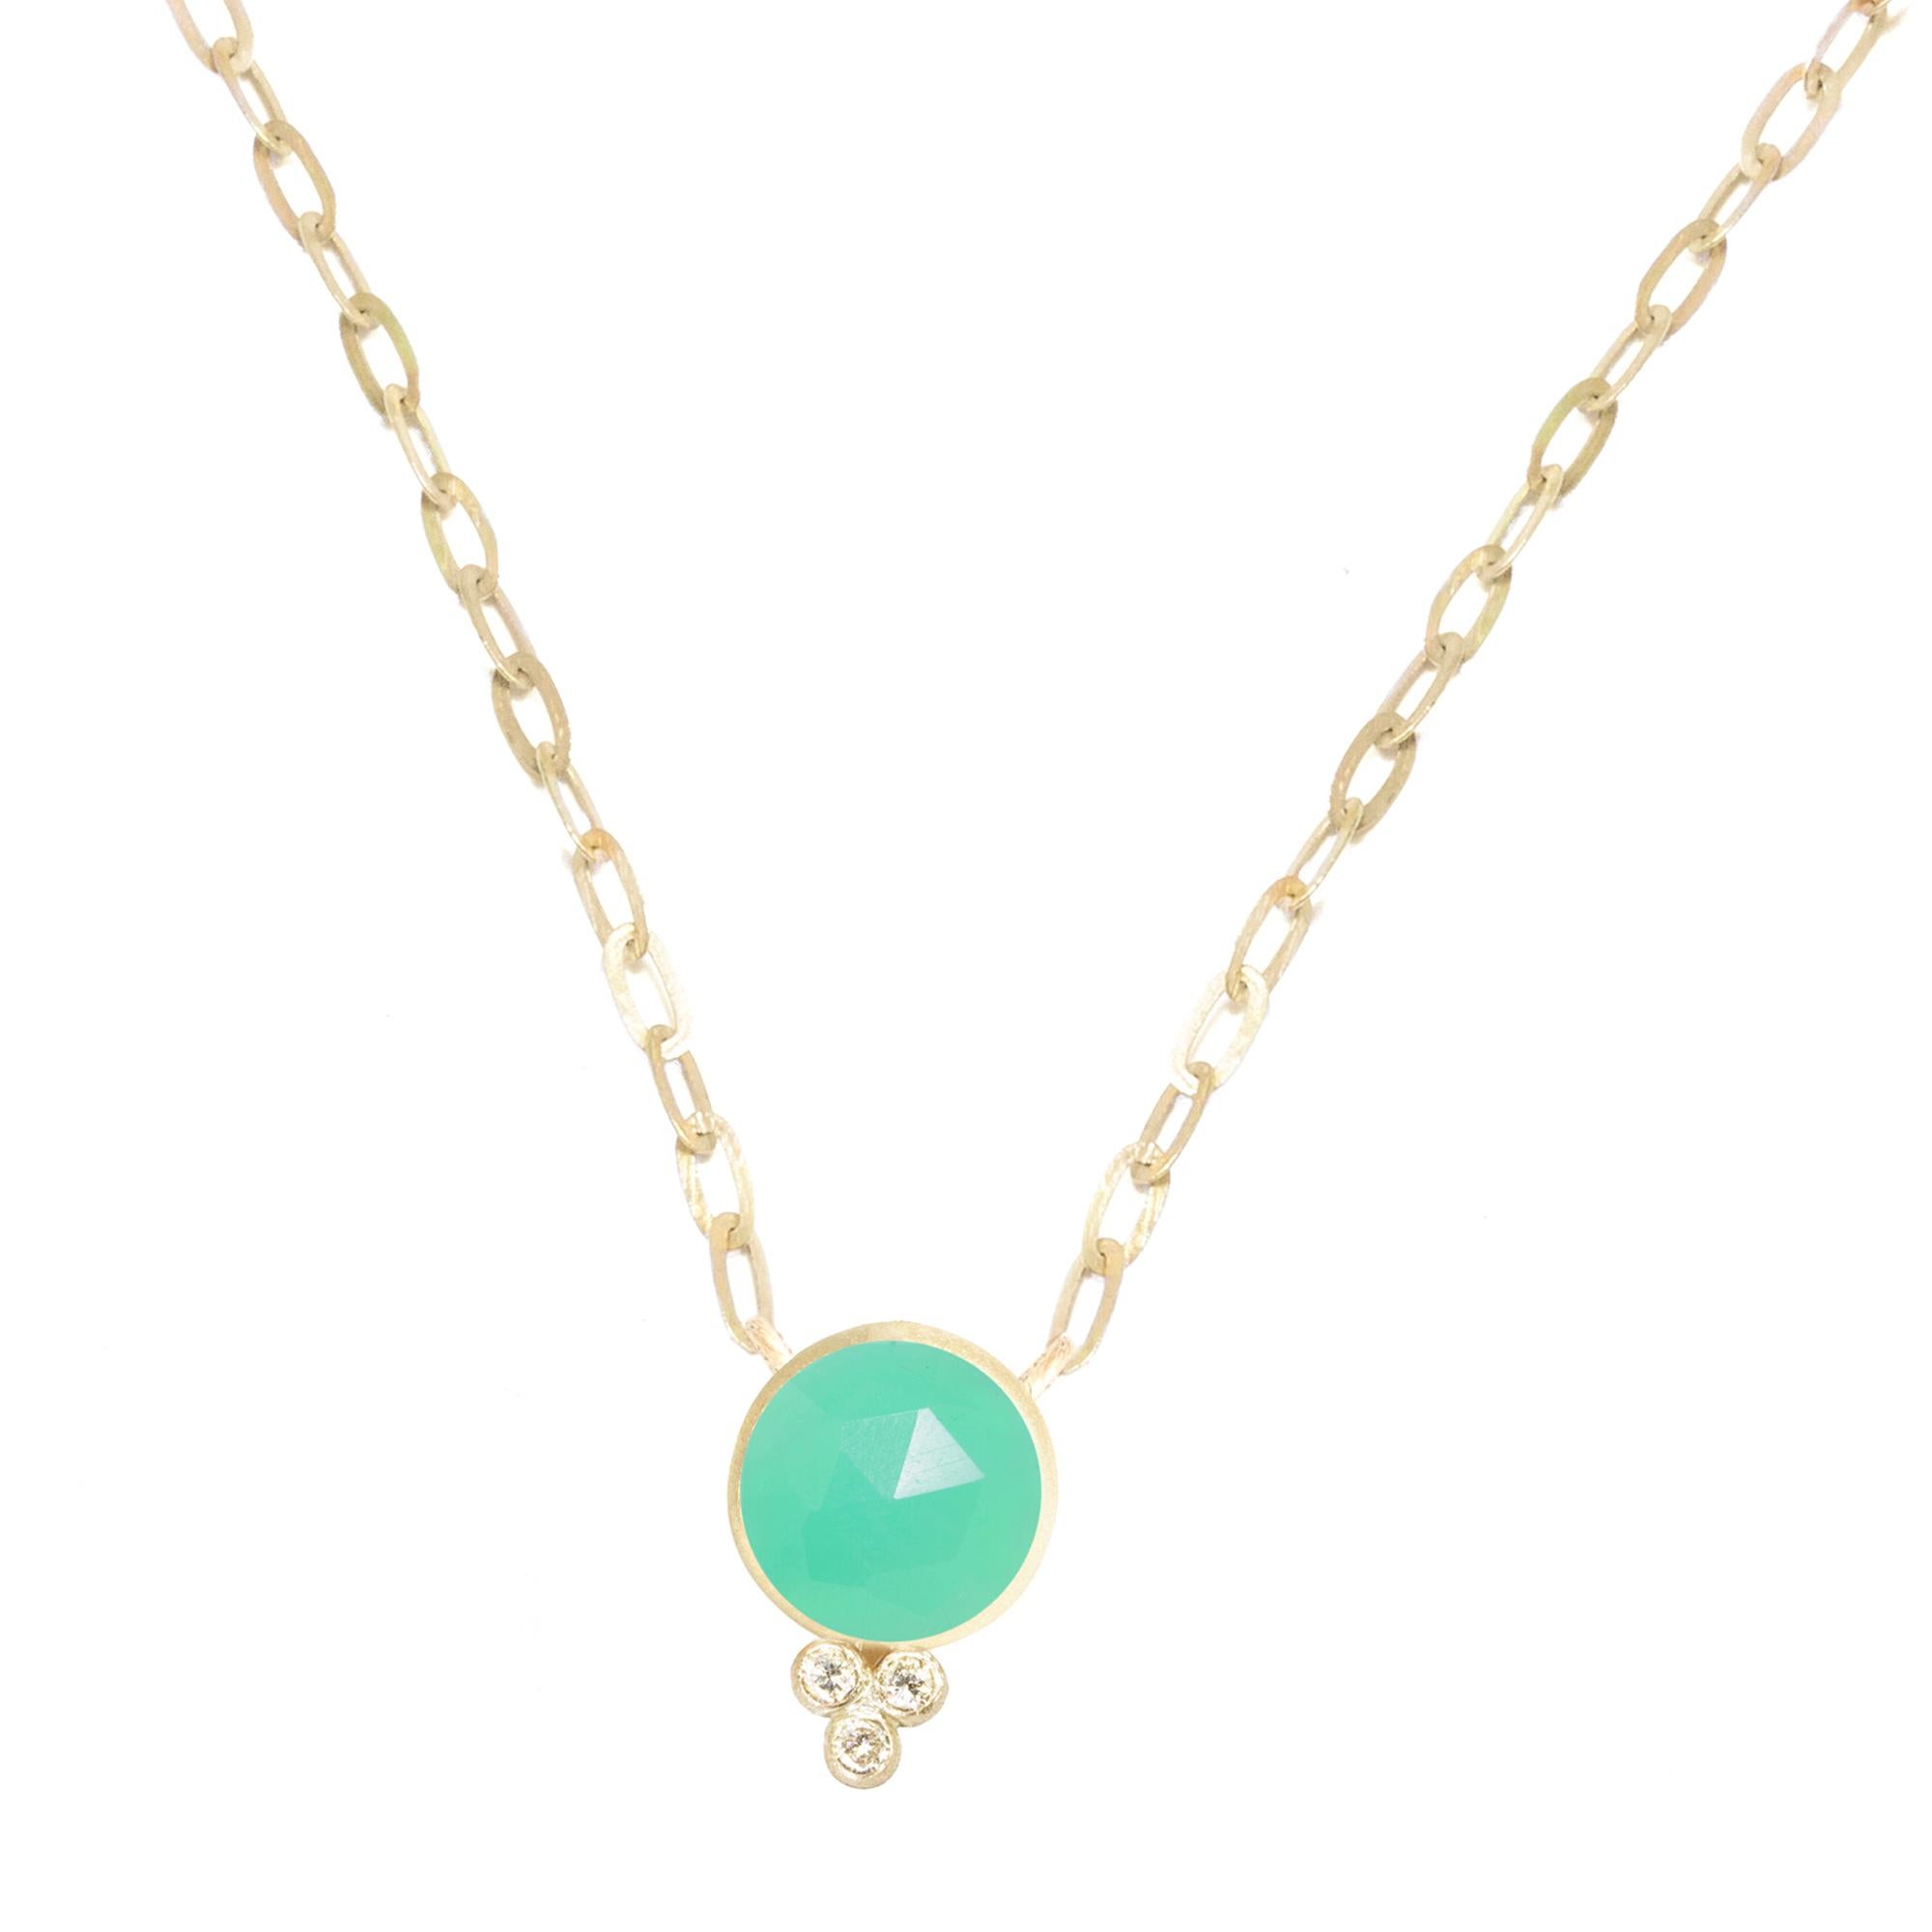 Square dance: Designed with chrysoprase in a textured gold bezel on a delicate link chain, our diamond-accented Ariana Gold Necklace can be worn on its own o layered with other styles.

Metal: 18K Yellow Gold
Stone carat: 3.5
Diamond carat: